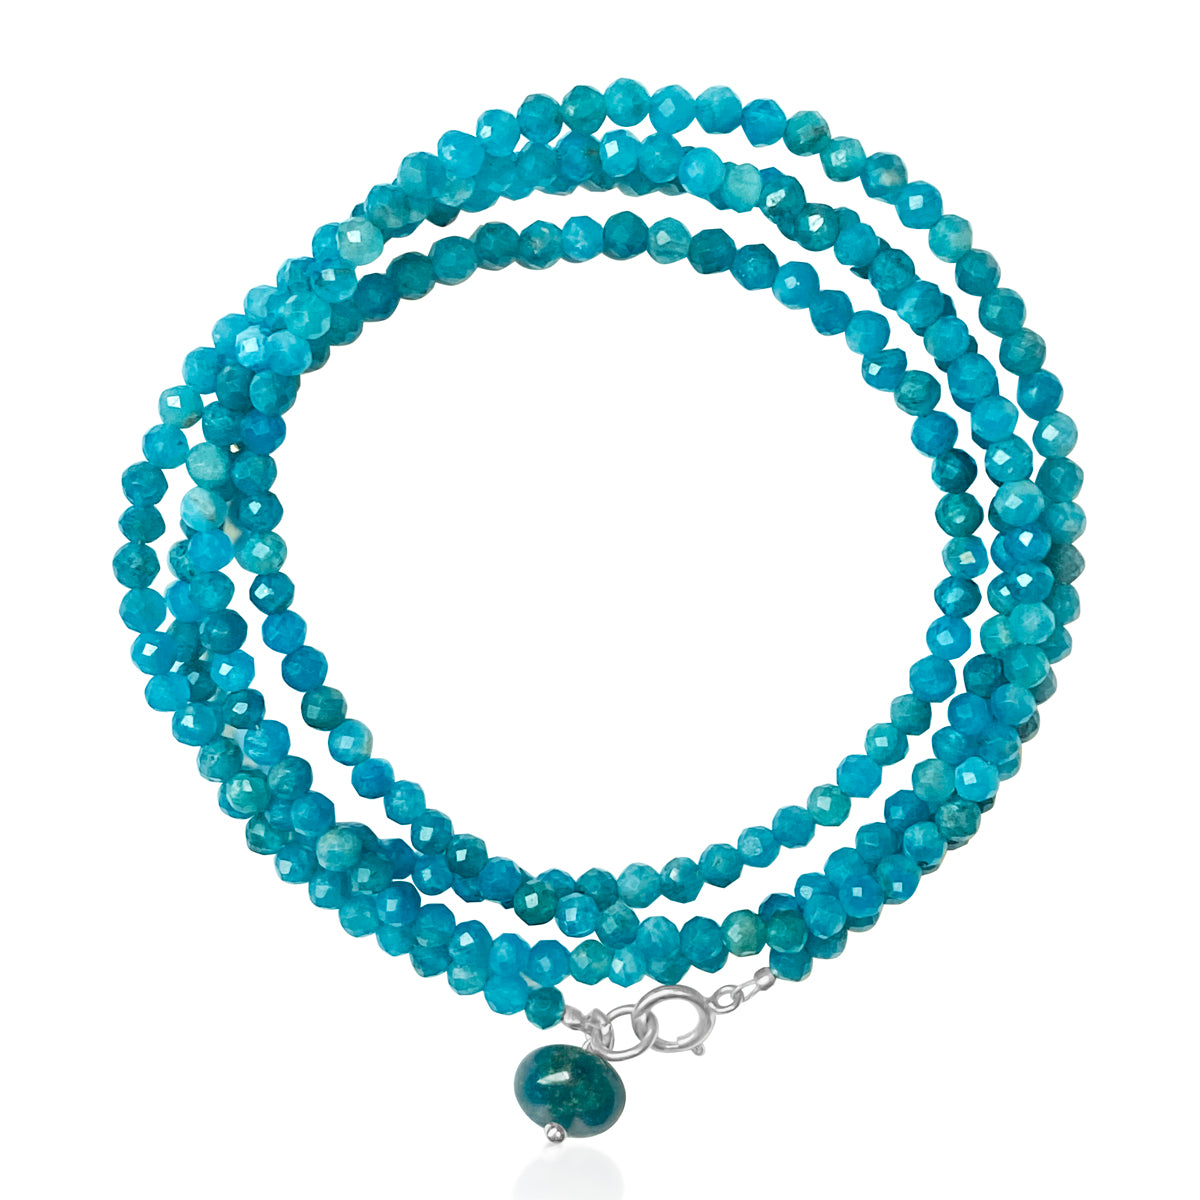 Apatite Wrap Bracelet to increase Self Confidence. Apatite helps you accept yourself as you really are, and to gain greater self confidence.  Apatite Bracelet for Healthy Habits - Best Healing Crystal Bracelet for Eating Disorders. Are you looking for crystals to help with eating disorders? 